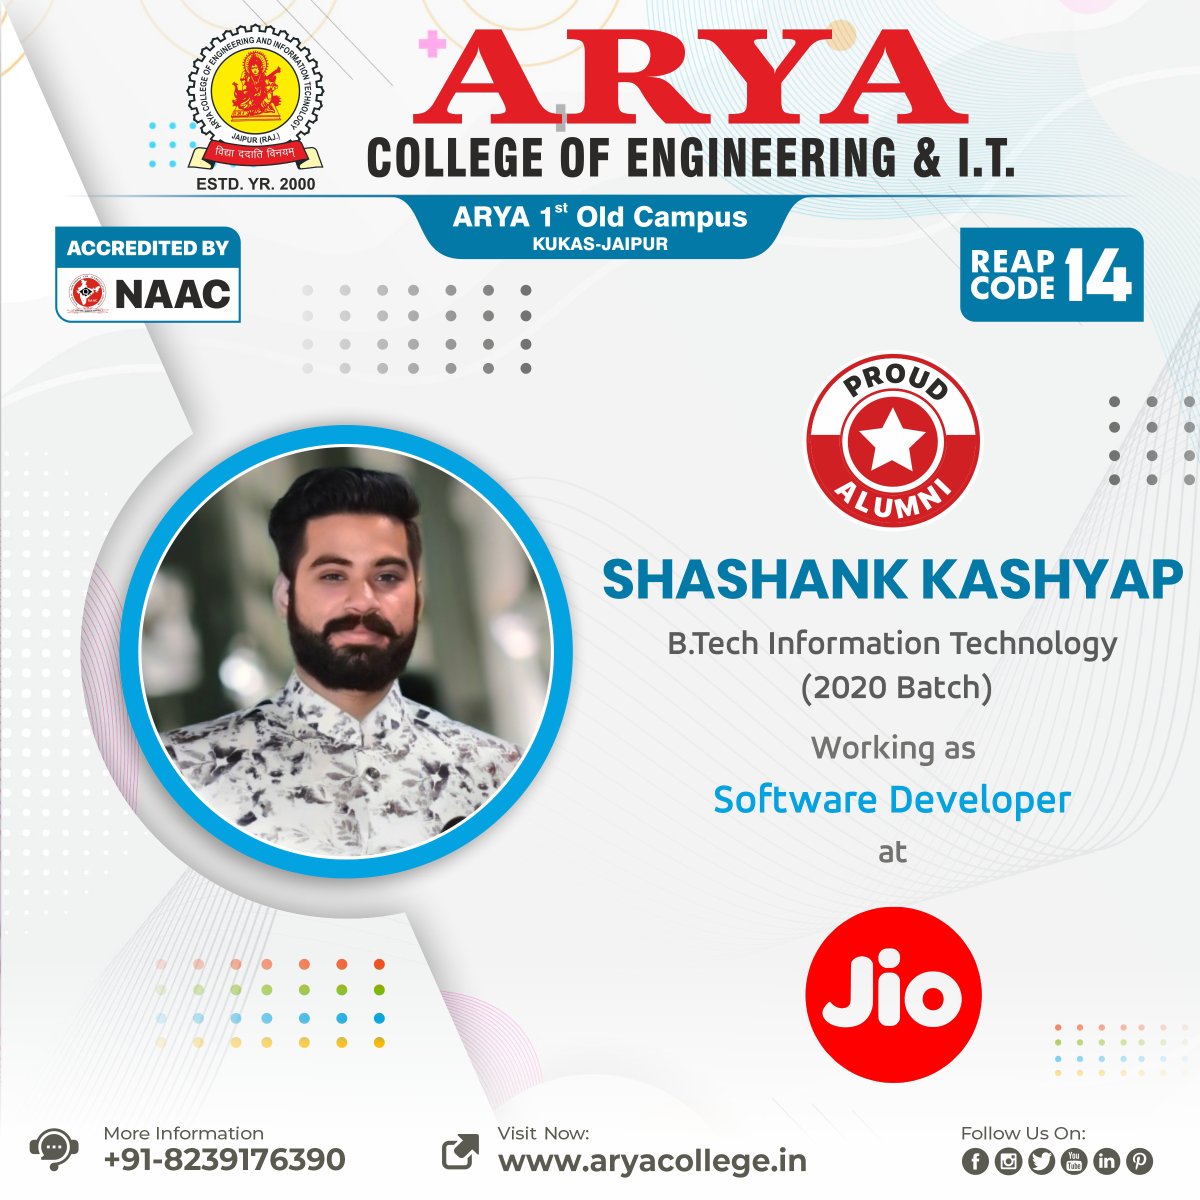 Proud moment for #Arya1stoldcampus as our Alumni from #BTech - Information Technology Batch-2020 Mr. Shashank Kashyap is Working as Software Developer in Jio.

#AryaCollege of Engineering & IT is honored to have alumni like you.

#ProudAlumni #AlumniAchievement #AryaCollegejaipur